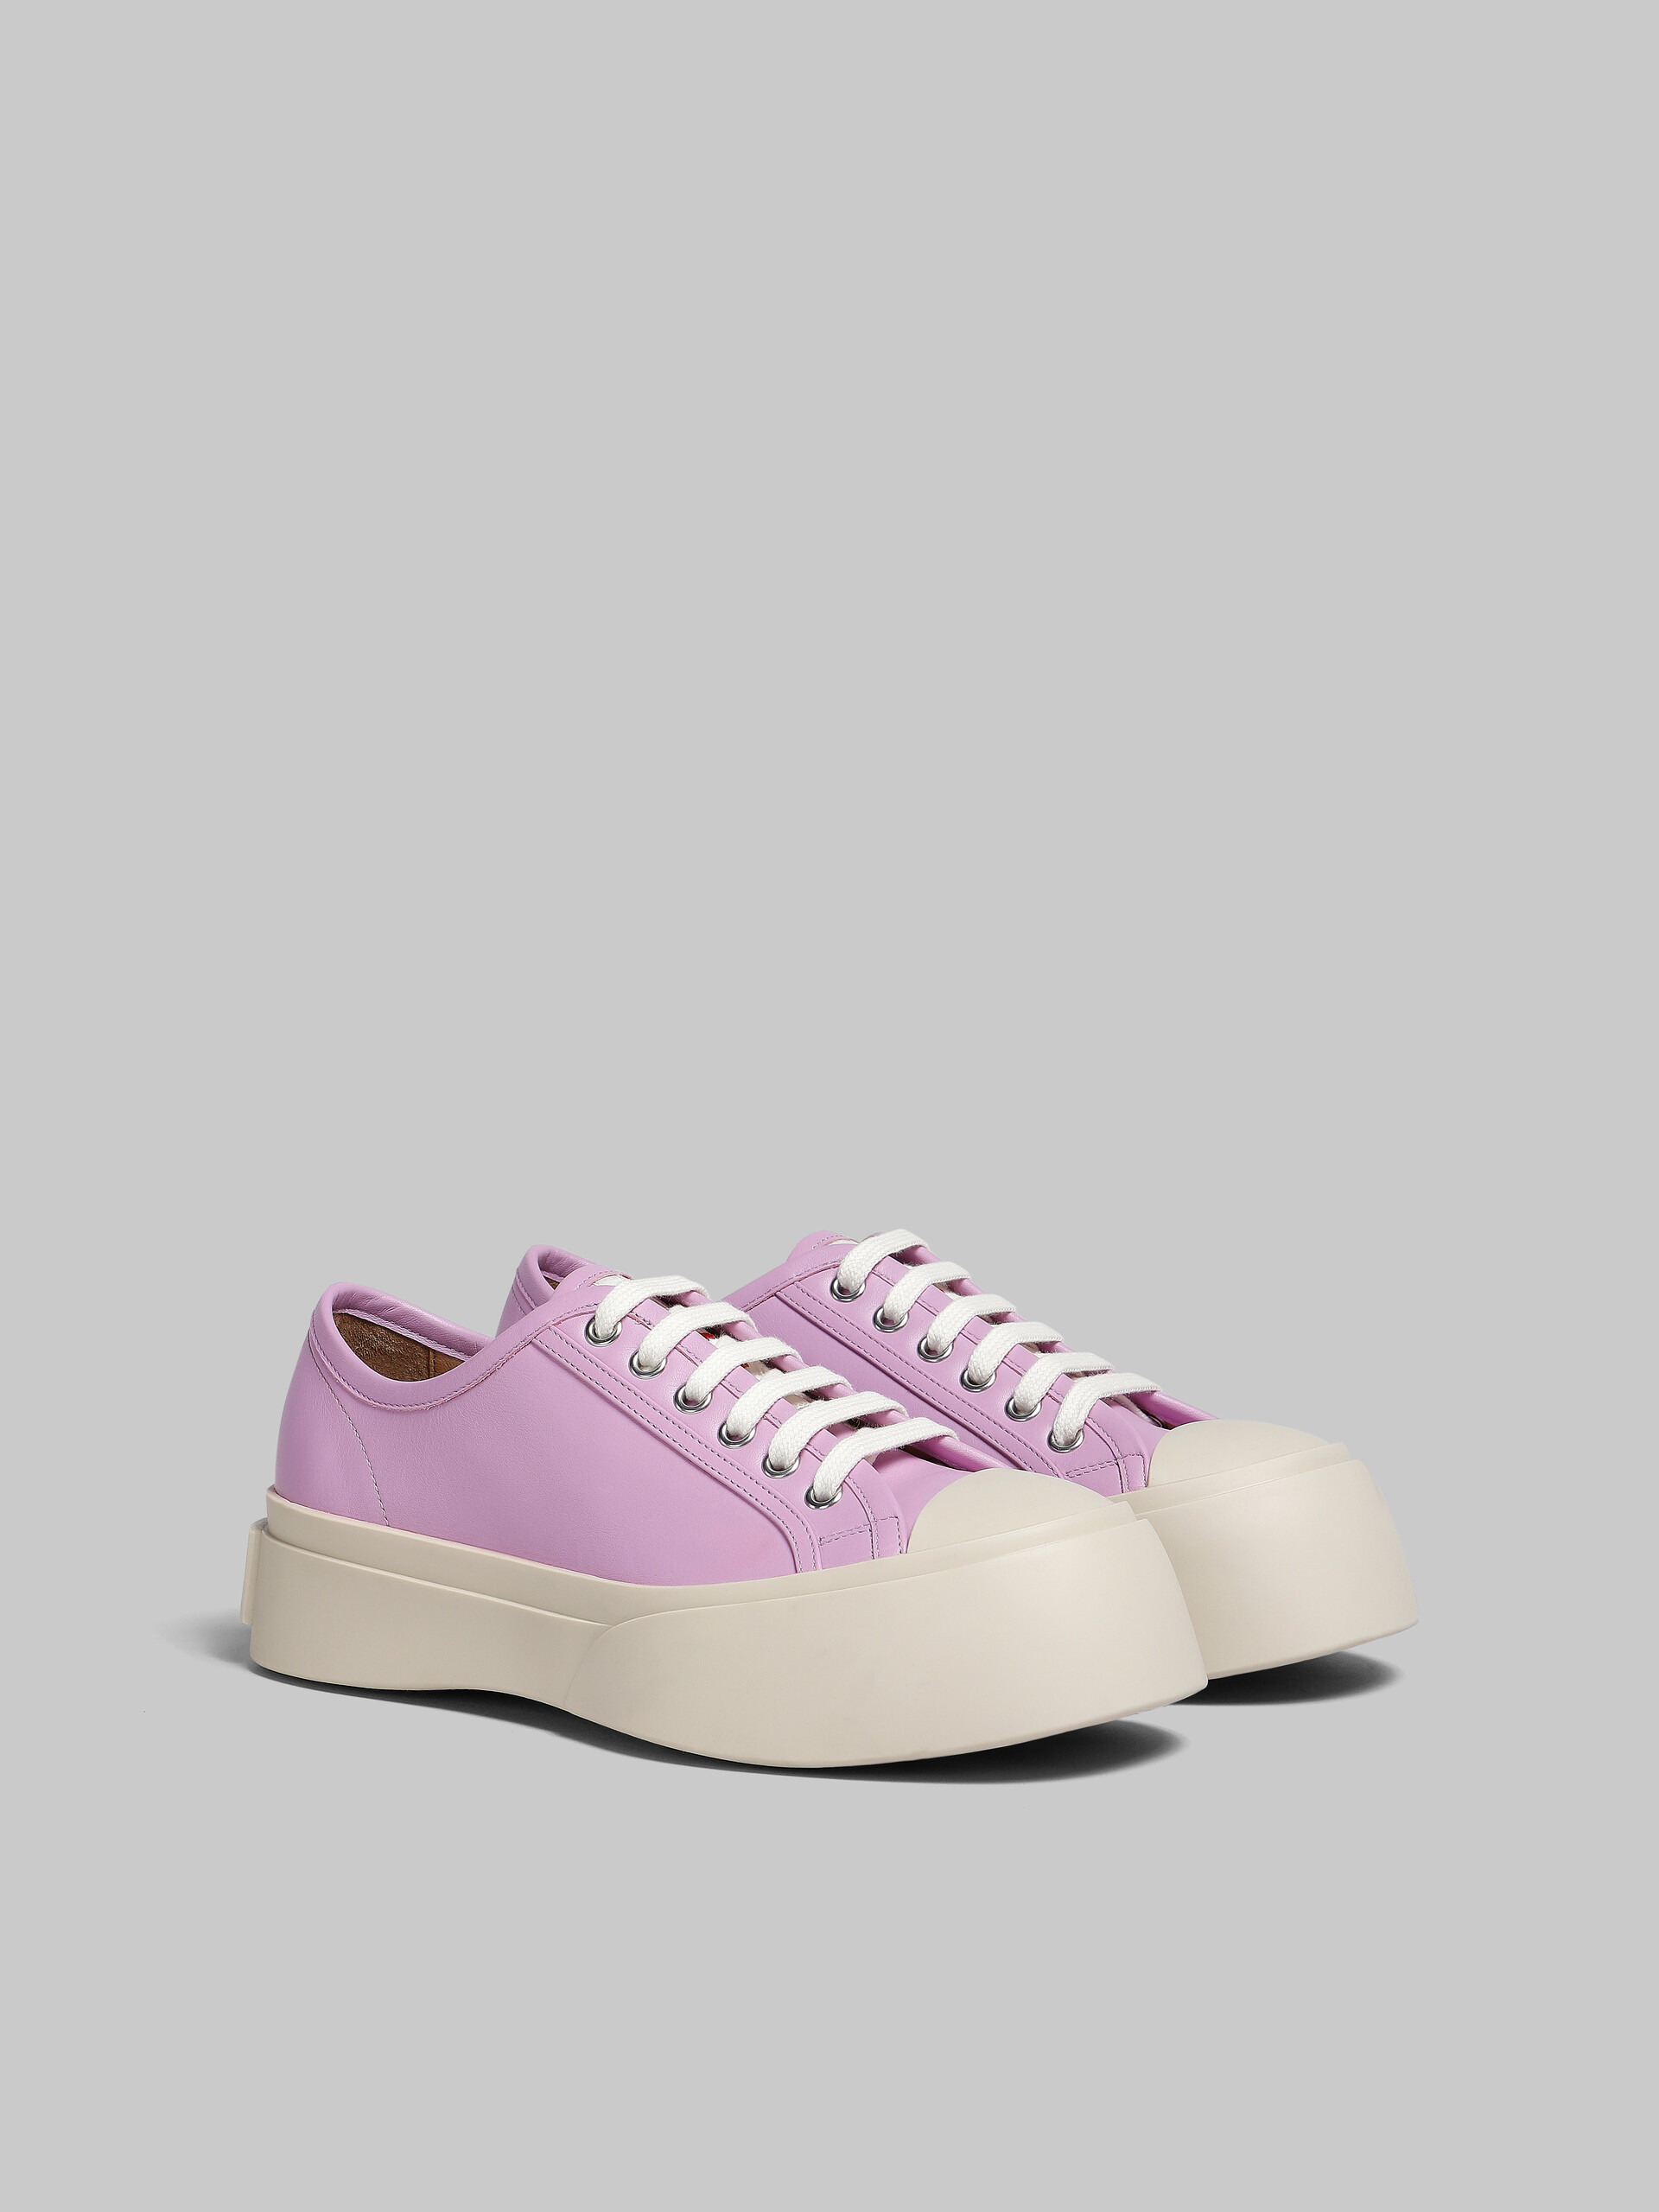 Lilac nappa leather Pablo lace-up sneaker - Sneakers - Image 2